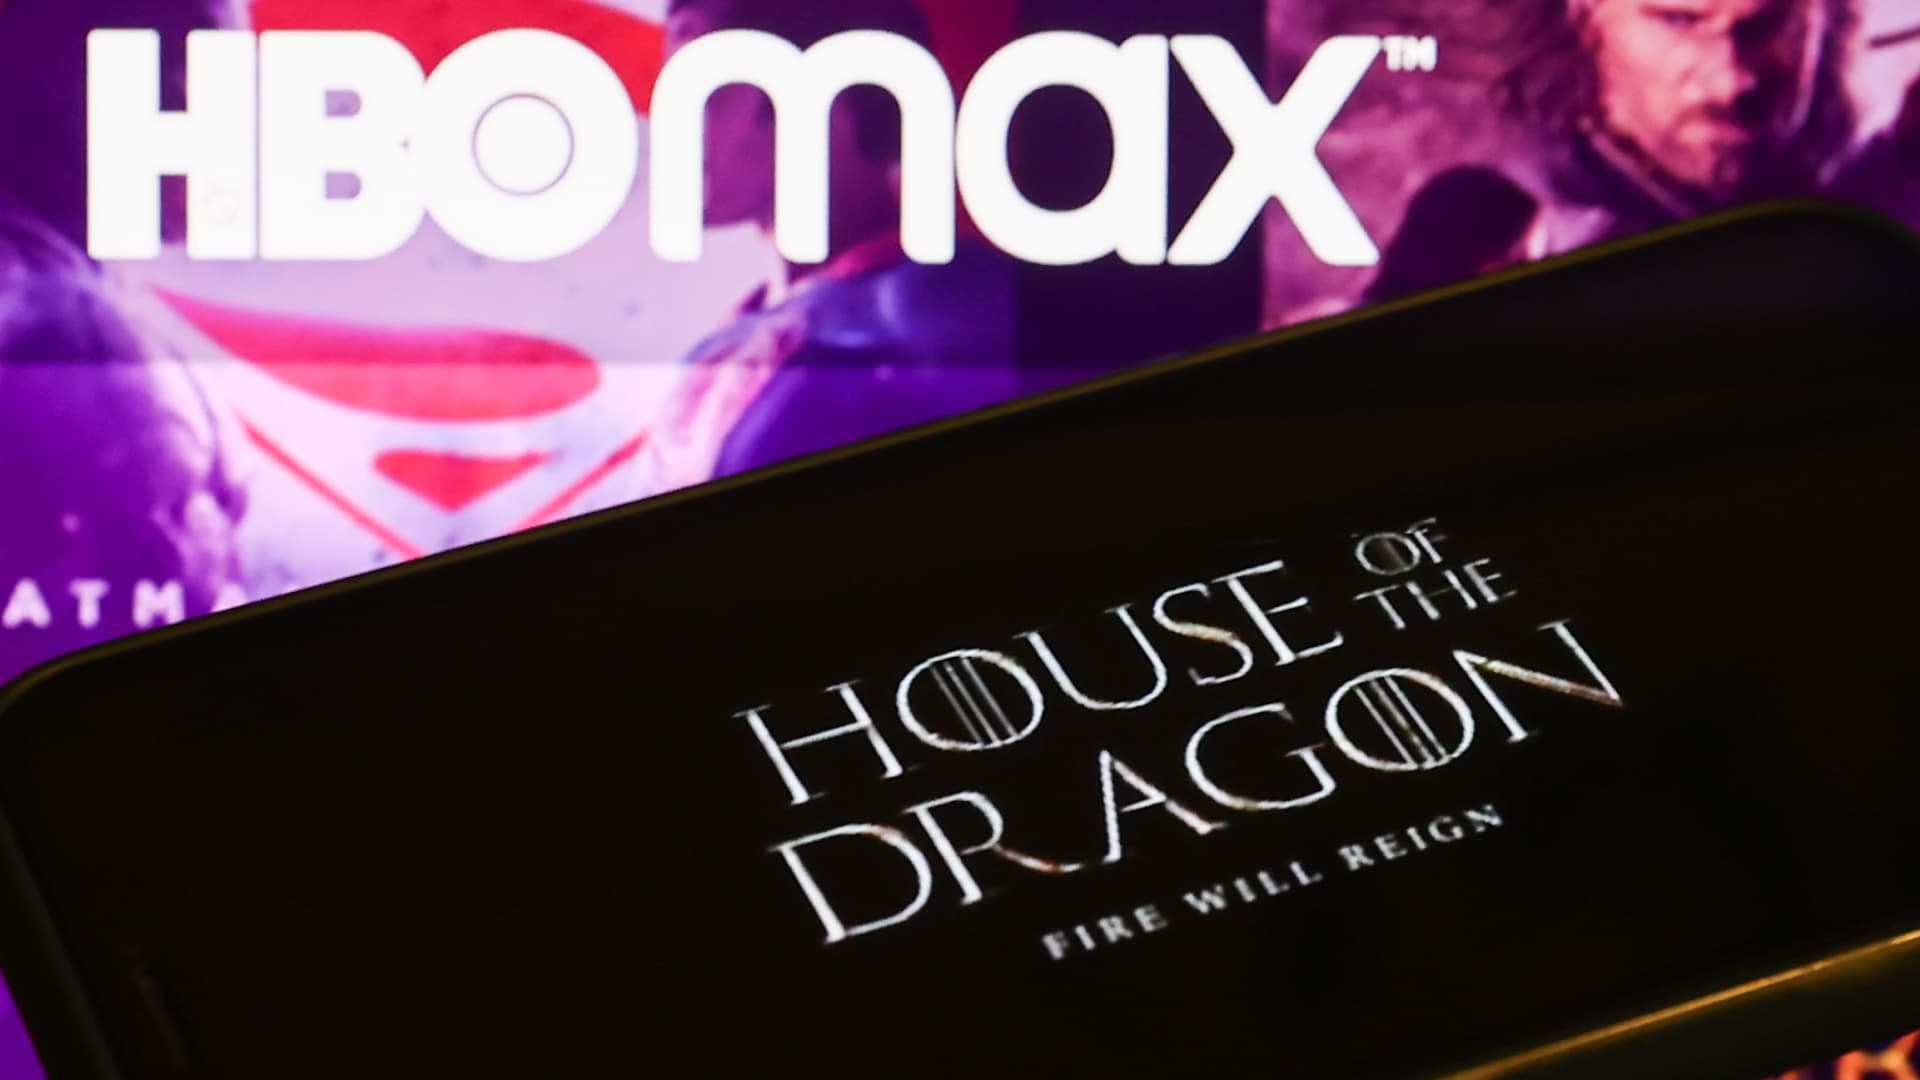 HBO renews ‘House of the Dragon’ after 20 million watch first episode